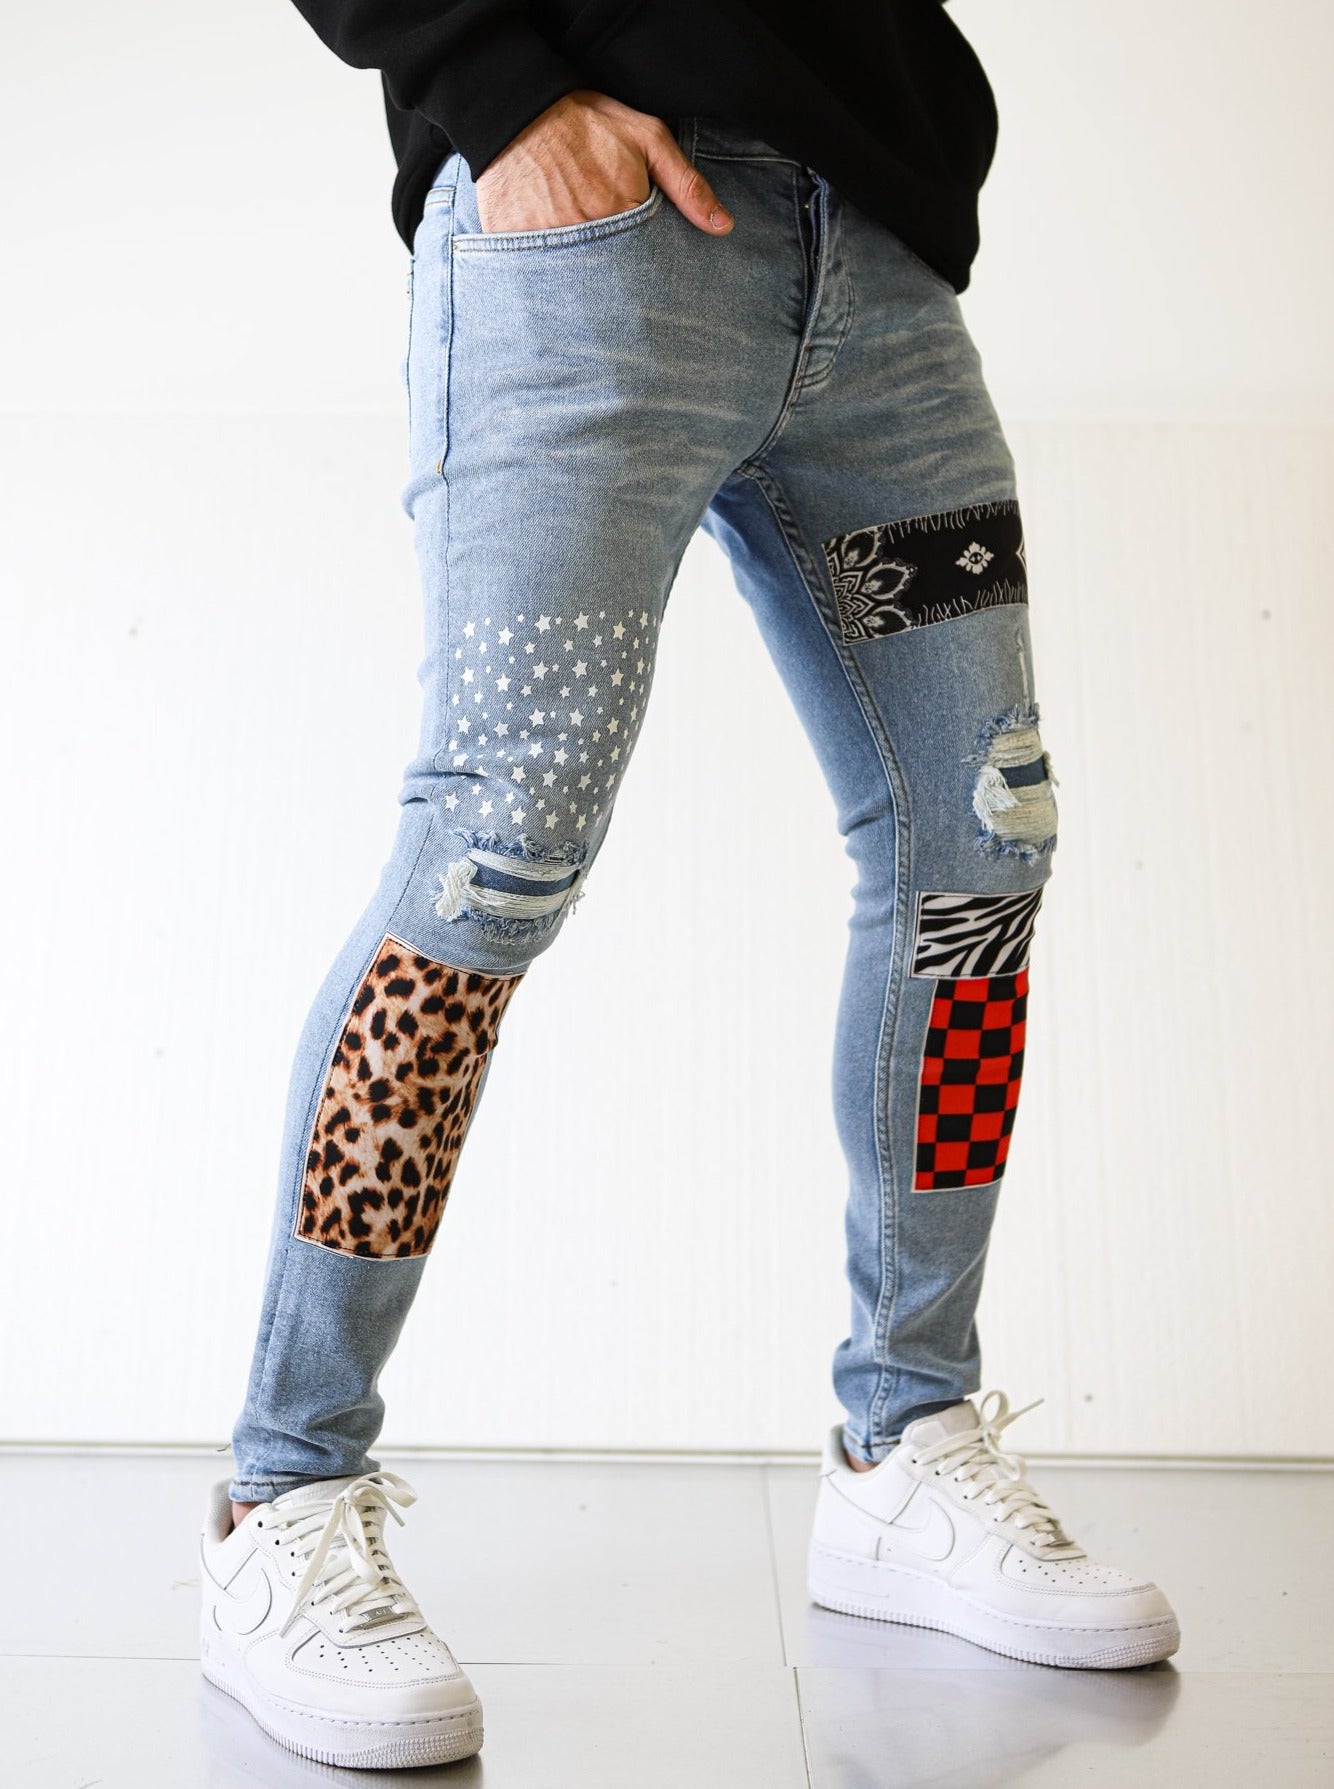 Patched Printed Blue Jeans